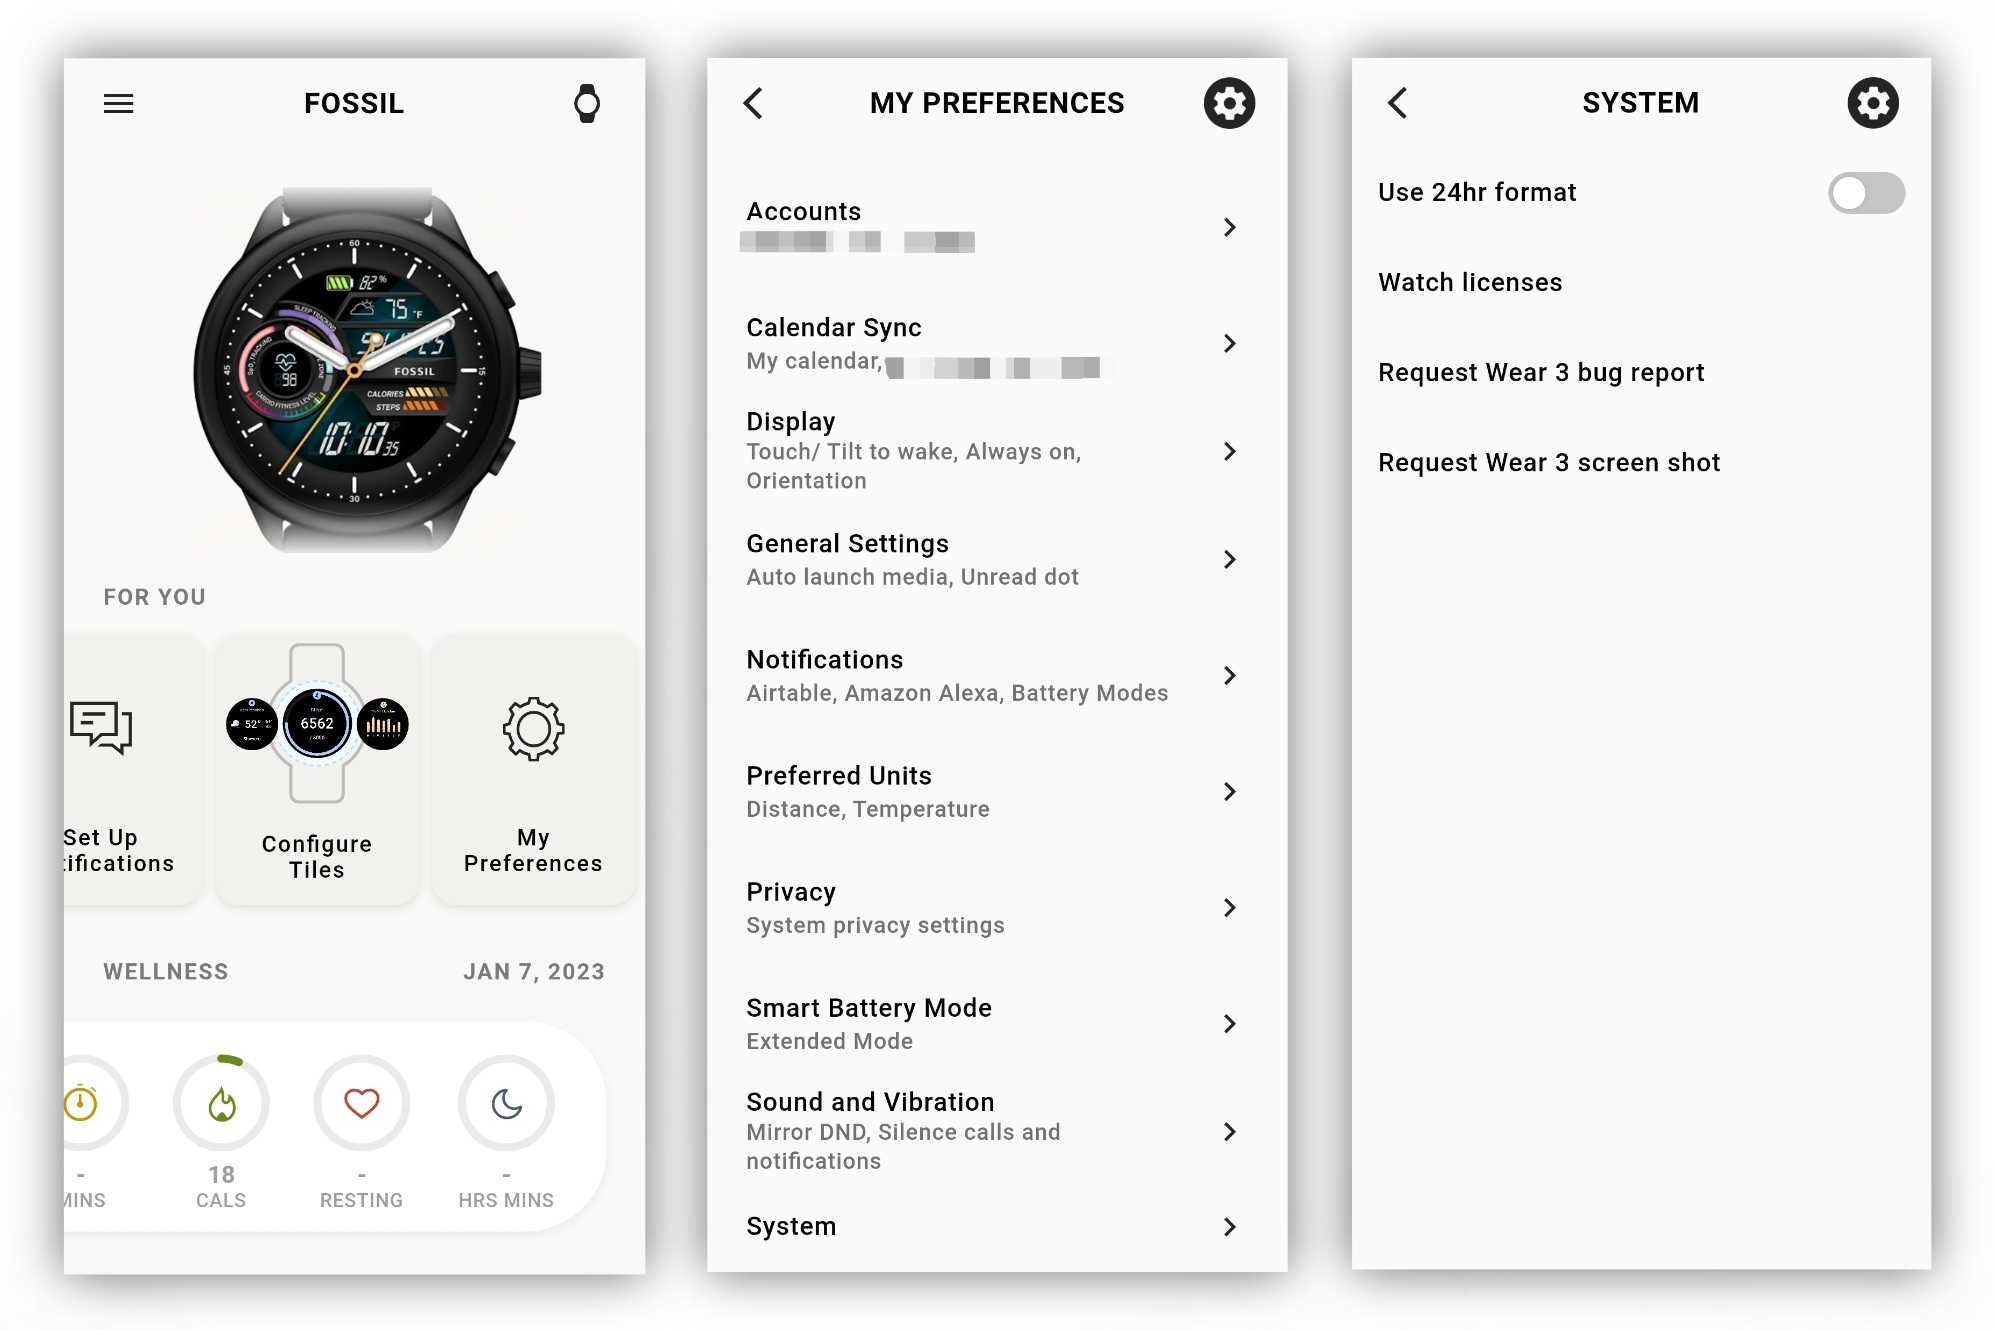 Take a screenshot with the Fossil Smartwatches app